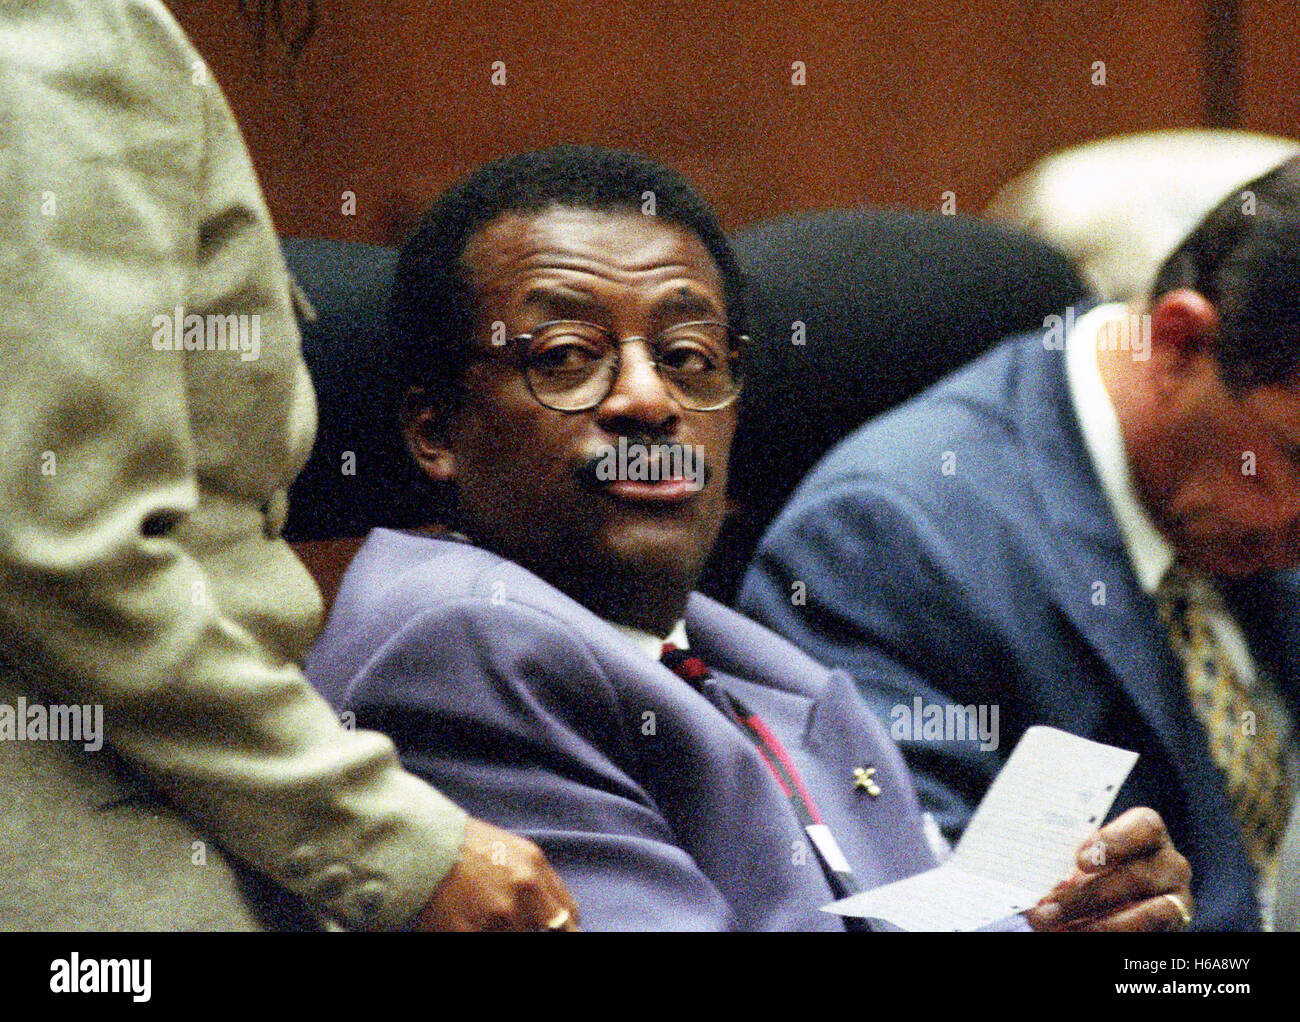 Los Angeles, California, USA. 13th July, 1995. Lead defense attorney Johnnie L. Cochran, Jr. confers with a member of his staff during the trial of former NFL star running back O.J. Simpson for the murder of his former wife, Nicole Brown Simpson and a friend of hers, restaurant waiter, Ron Goldman in Los Angeles County Superior Court in Los Angeles, California on July 13, 1995.Credit: Steve Grayson/Pool via CNP © Steve Grayson/CNP/ZUMA Wire/Alamy Live News Stock Photo